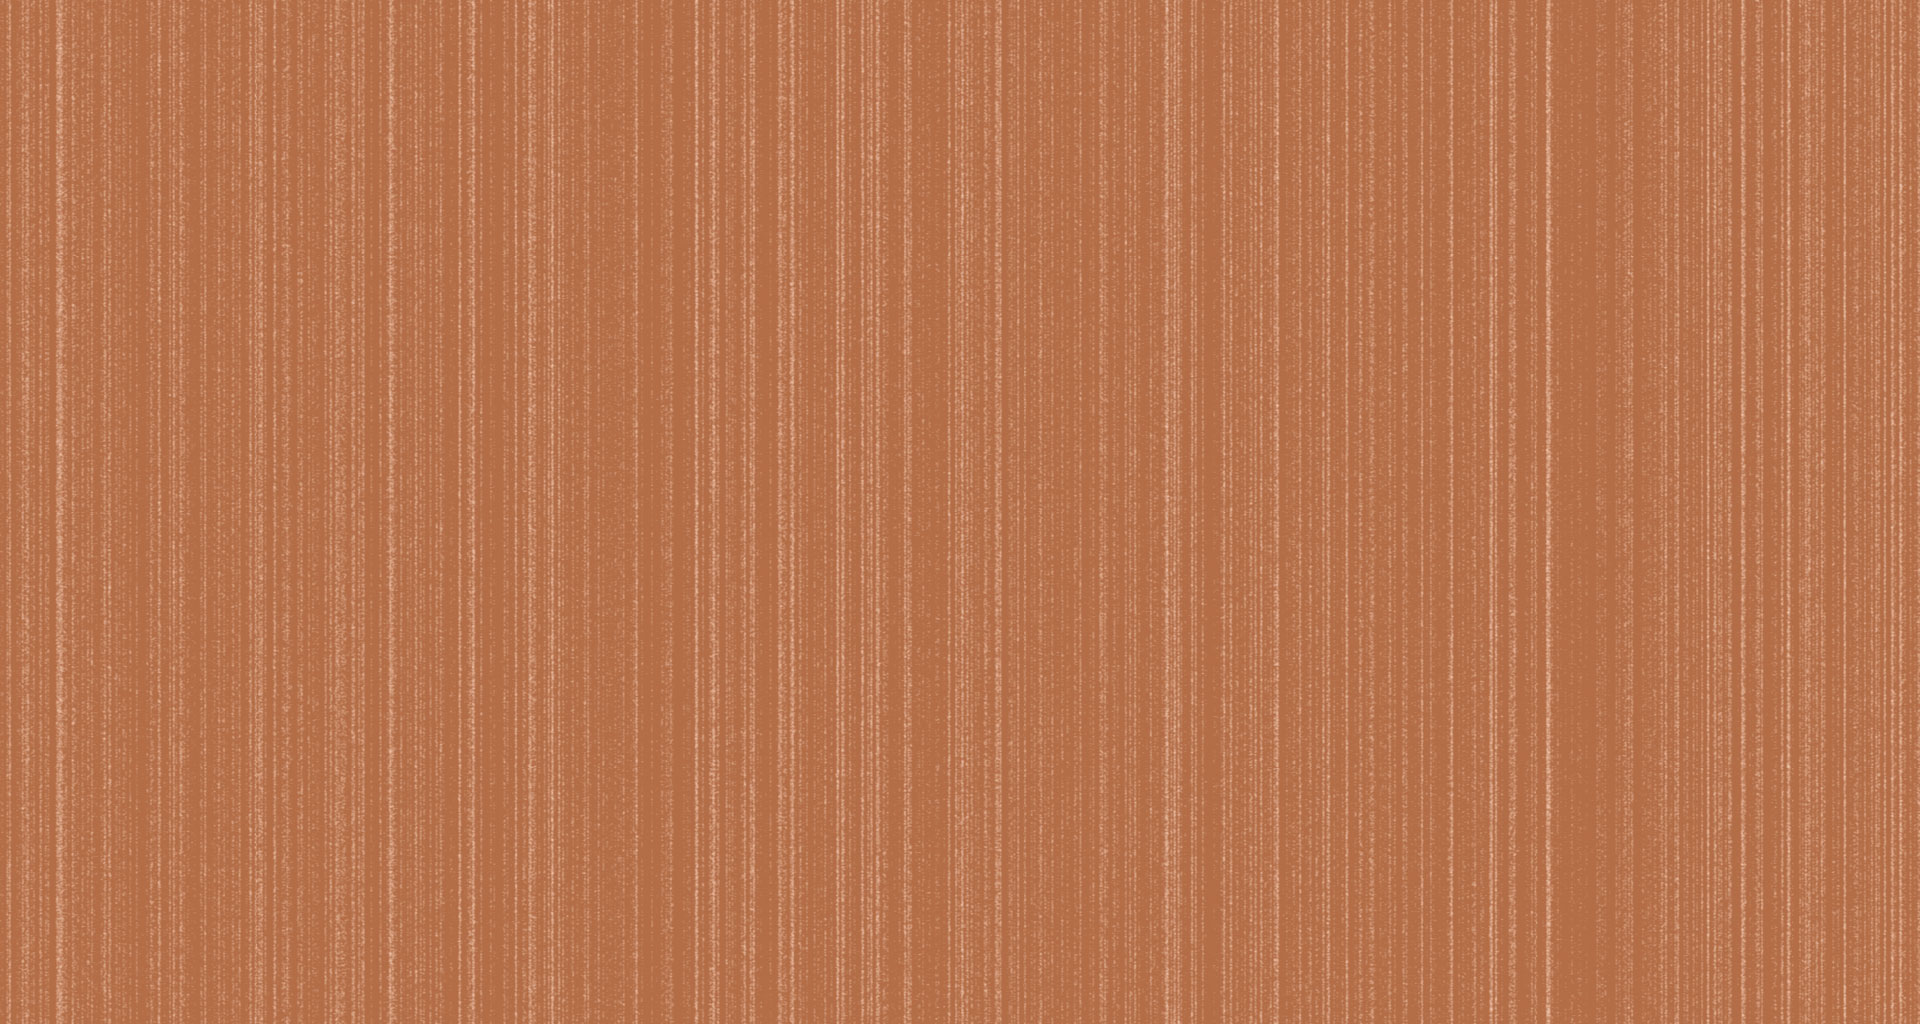 Wooden Texture Background hd Images